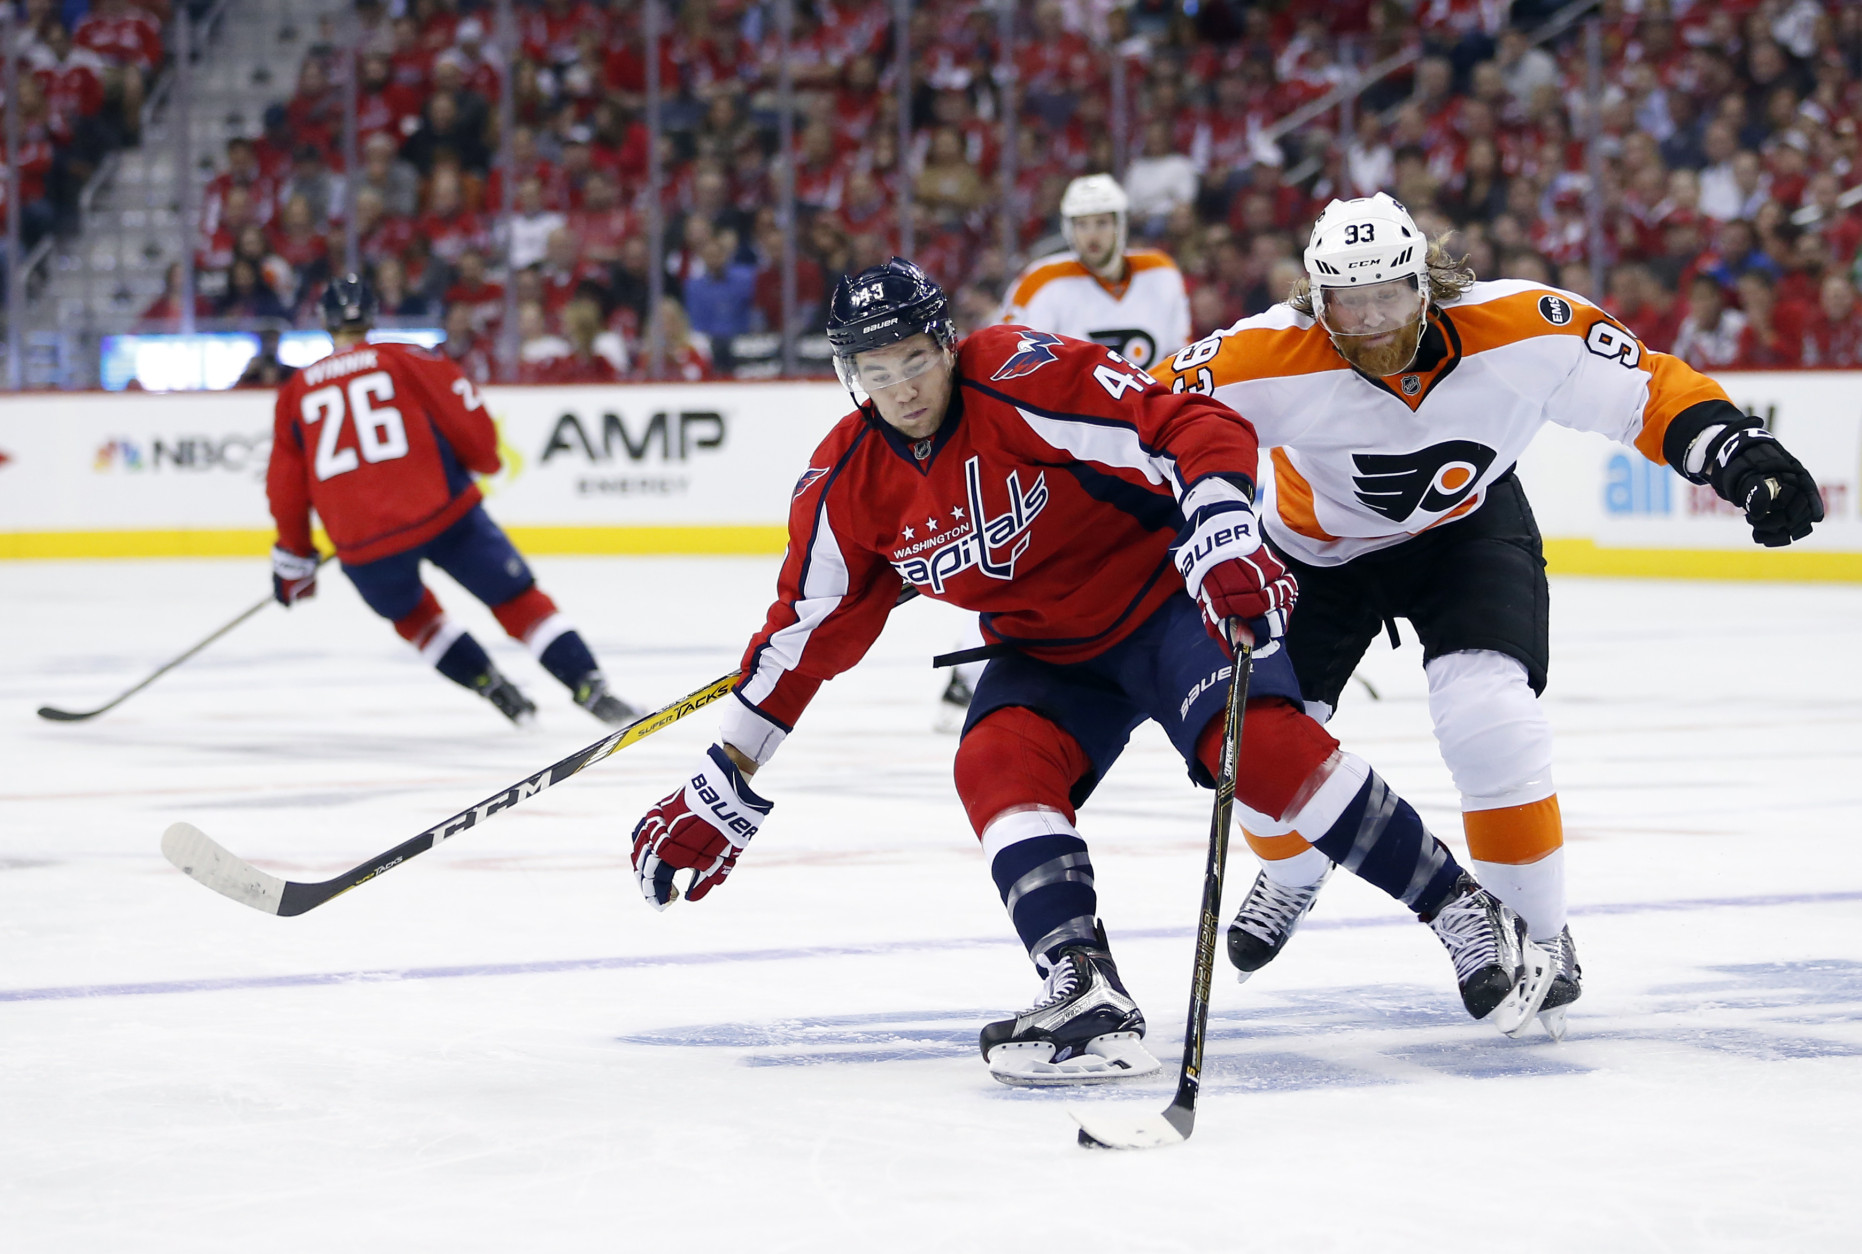 Washington Capitals right wing Tom Wilson (43) skates with the puck with Philadelphia Flyers left wing Jakub Voracek (93), from the Czech Republic, behind him during the first period of Game 1 of a first-round NHL hockey Stanley Cup playoff series Thursday, April 14, 2016, in Washington. (AP Photo/Alex Brandon)